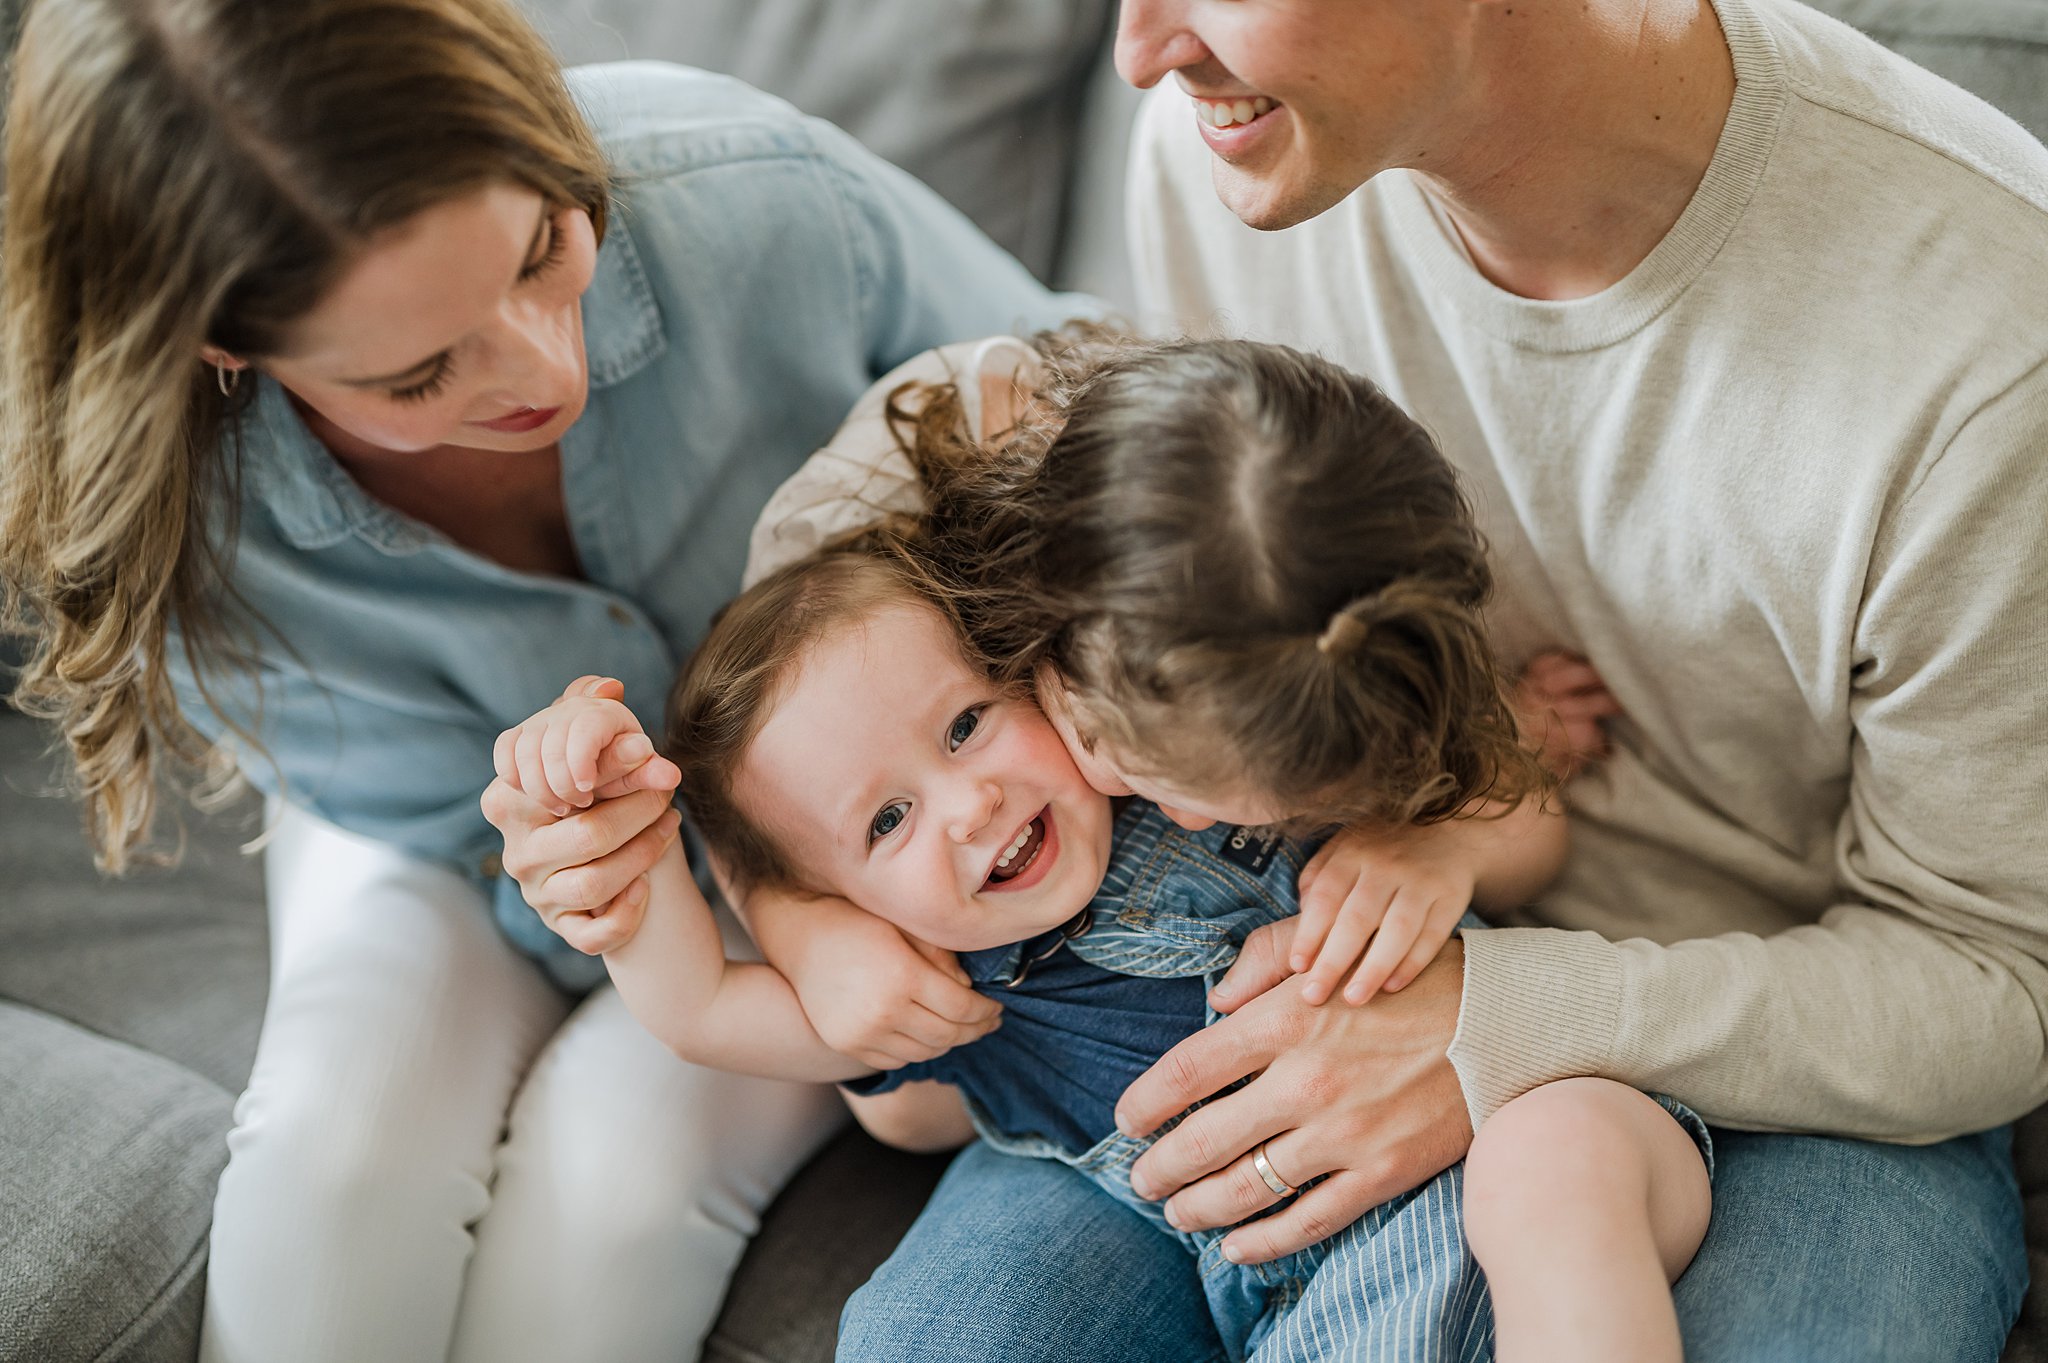 A toddler boy in blue overalls gets tickled by his family while sitting on a couch